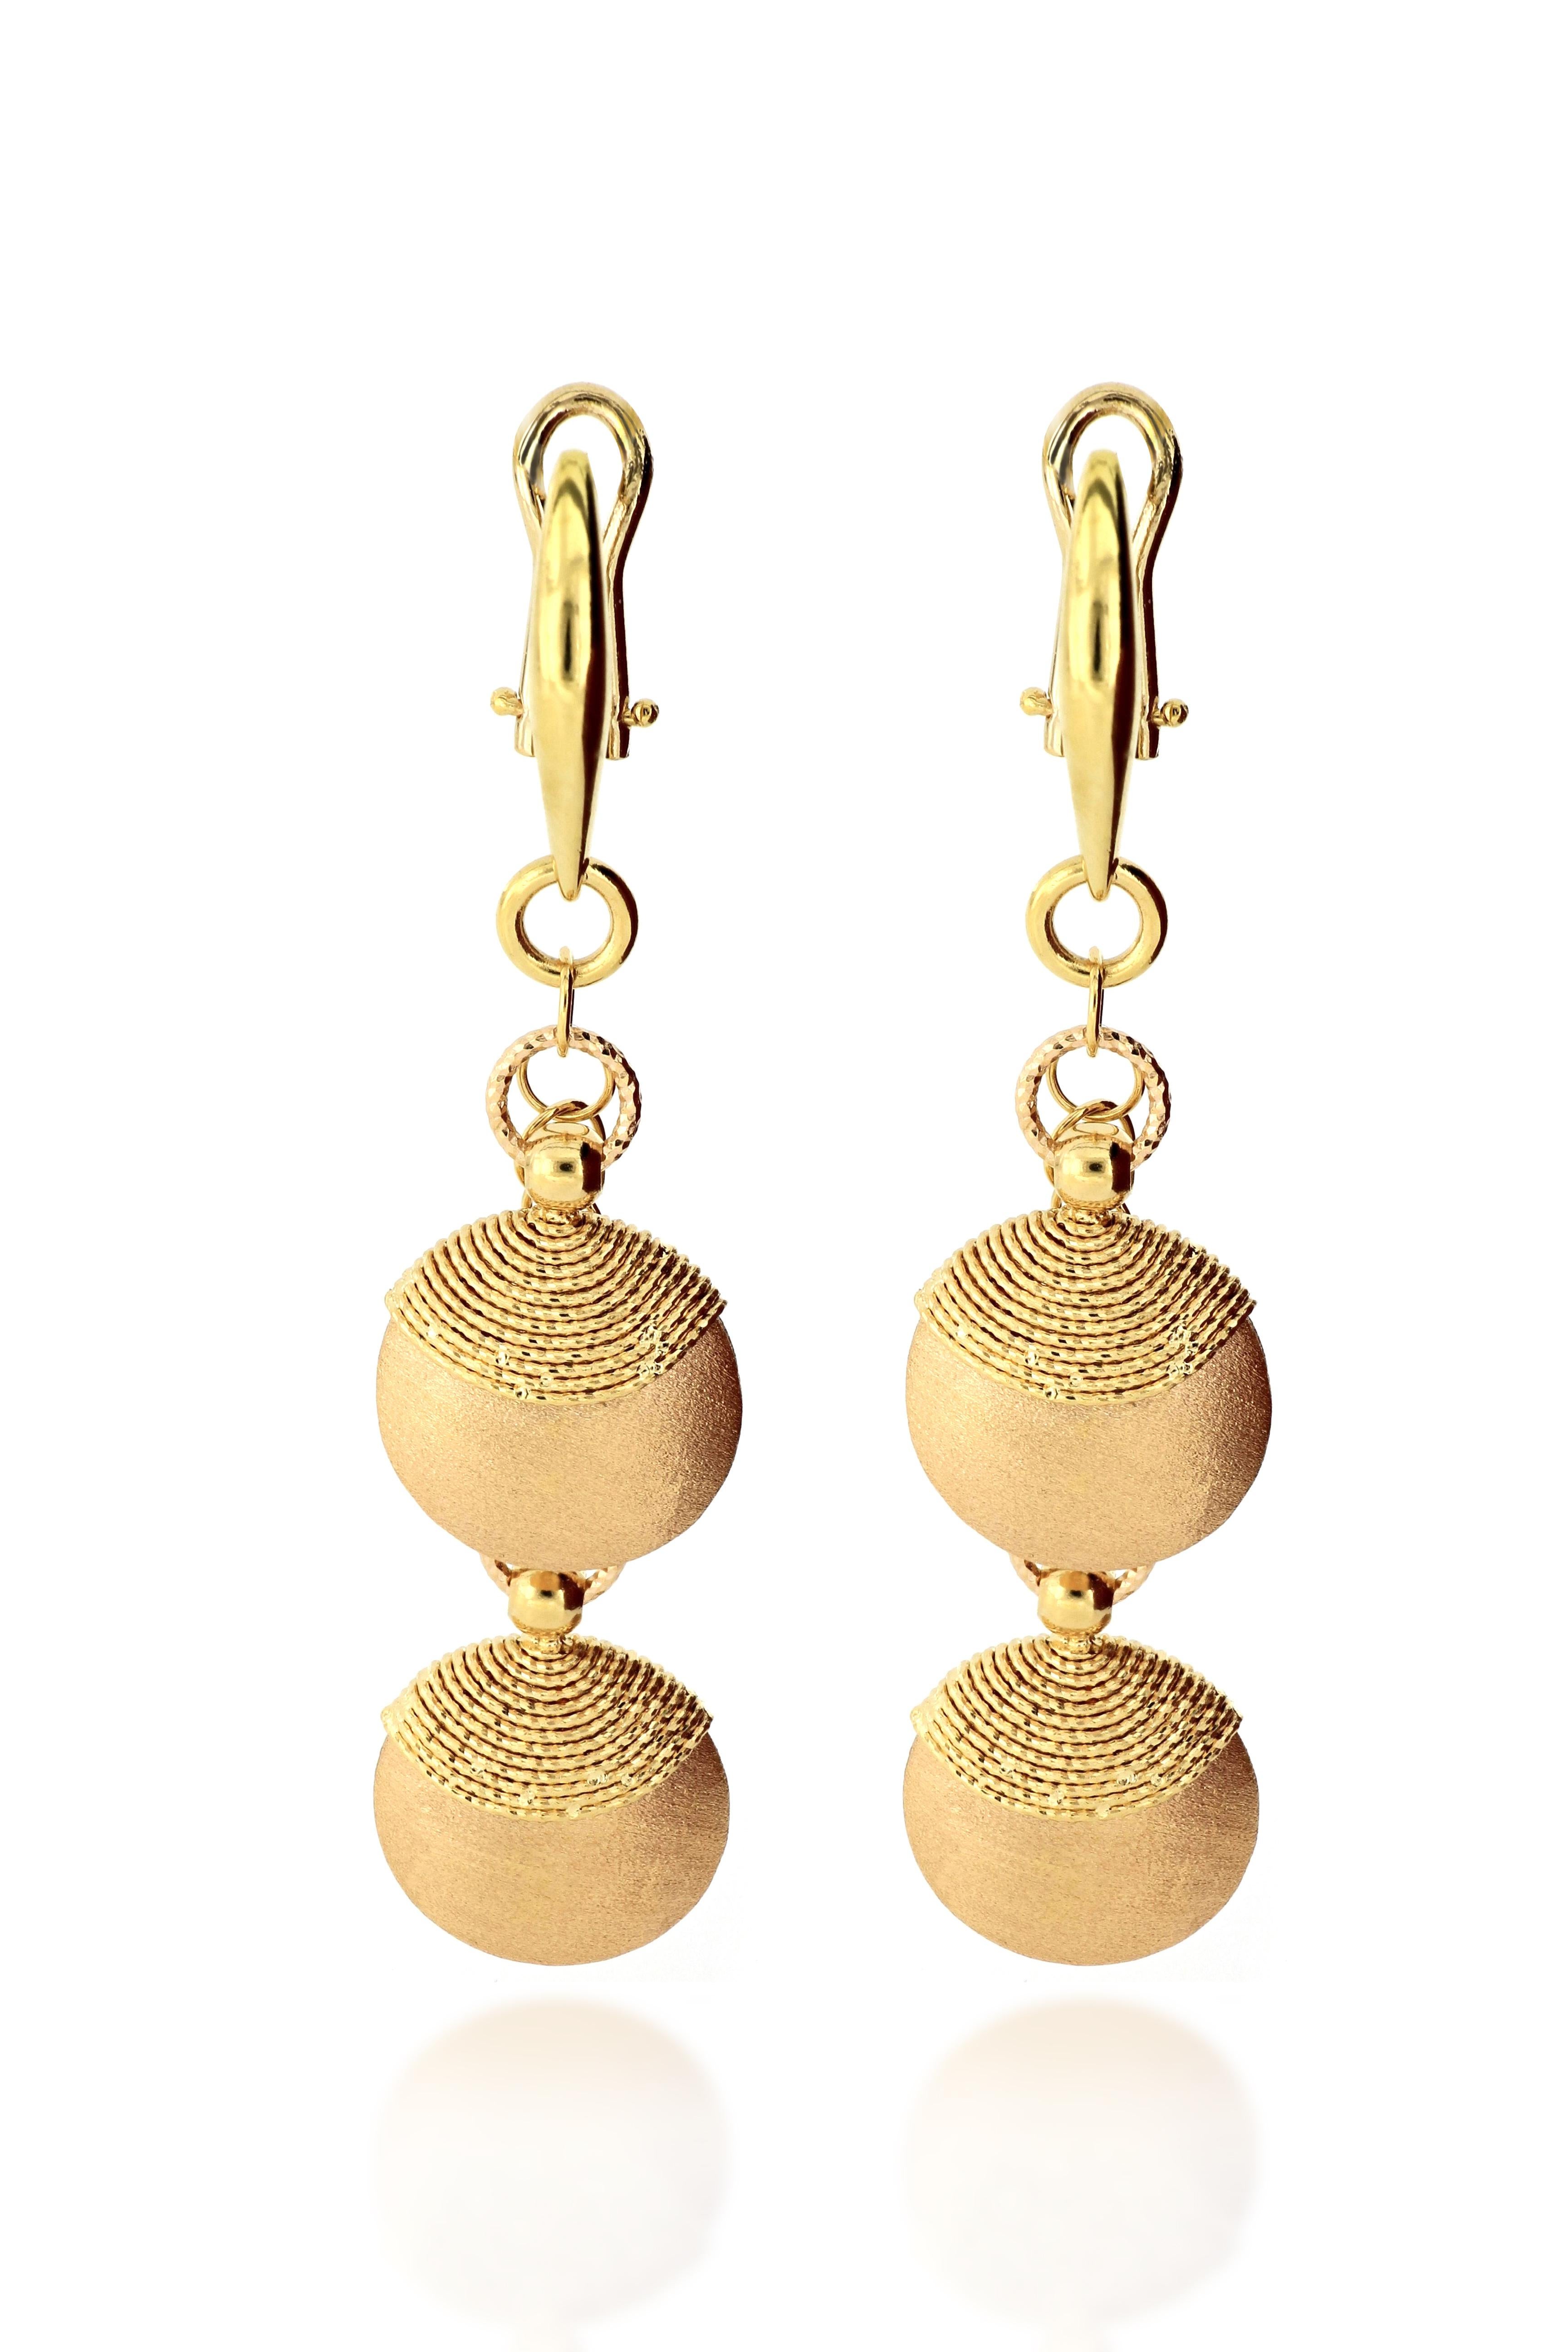 A beautiful pair of earrings in 18 karat gold, Italian made with superb craftsmanship. The dangling earrings are with brushed and frosted finish,  very special and stylish which can be worn in every occasion 
O’Che 1867 was founded one and a half